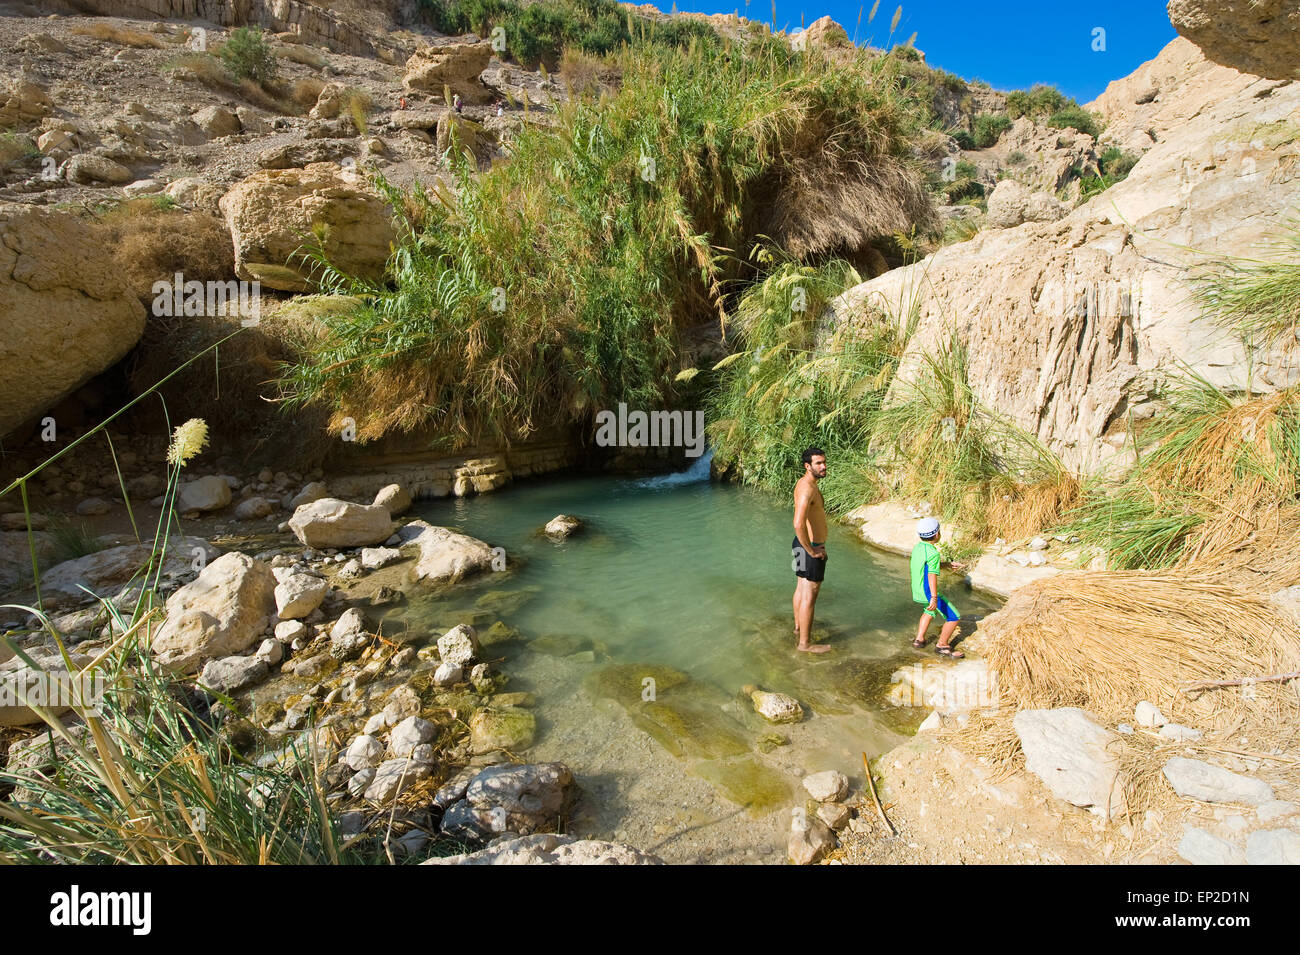 A man and a child are relaxing in the water of the oasis Ein Gedi close to the dead sea in Israel Stock Photo